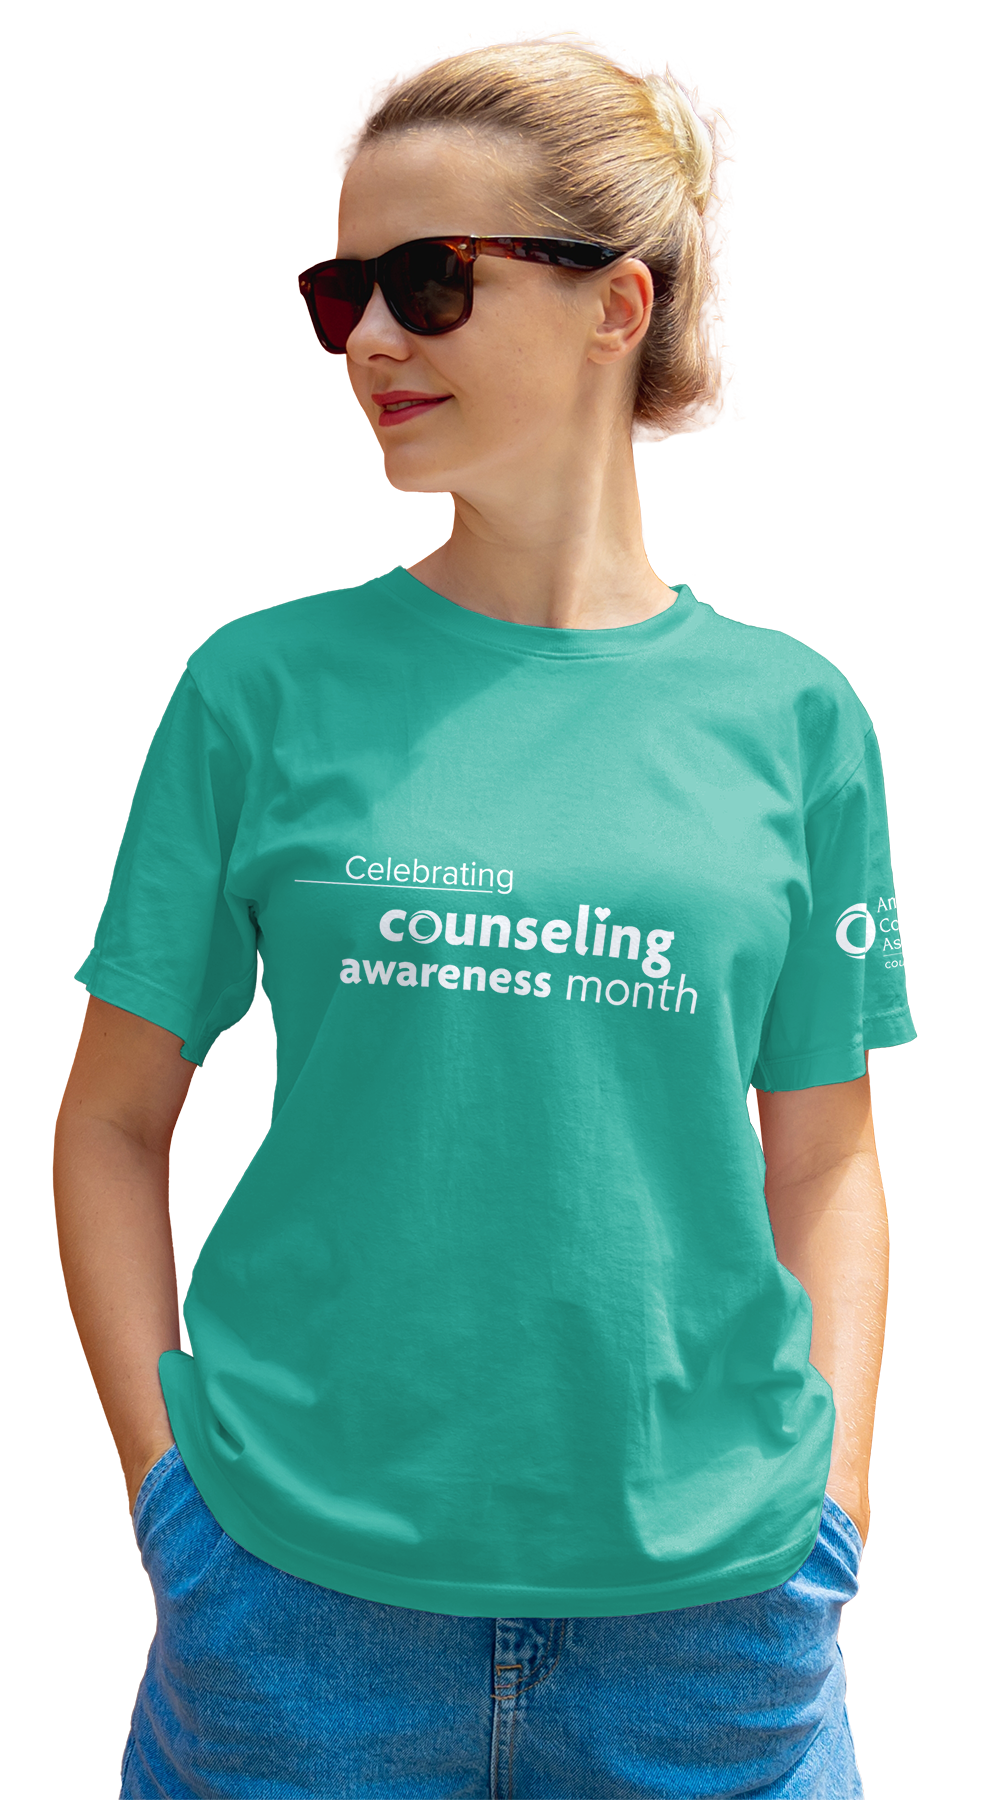 Woman wearing teal day counseling awareness month t-shirt